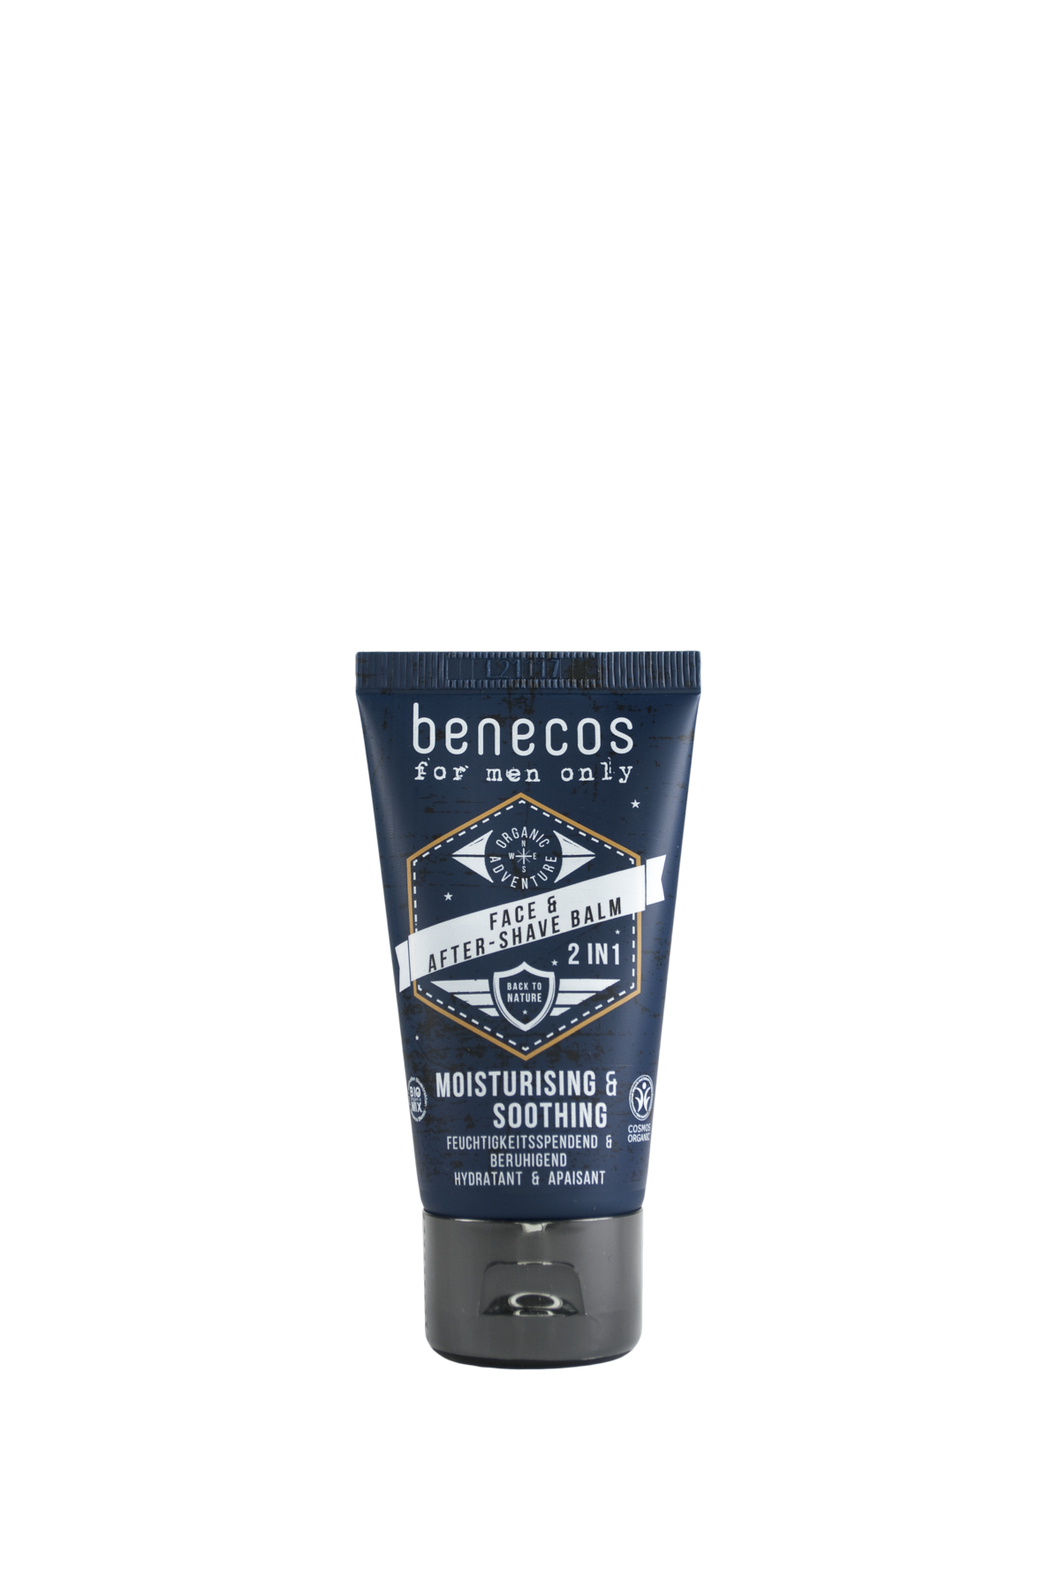 benecos for men only Face & After-Shave Balm